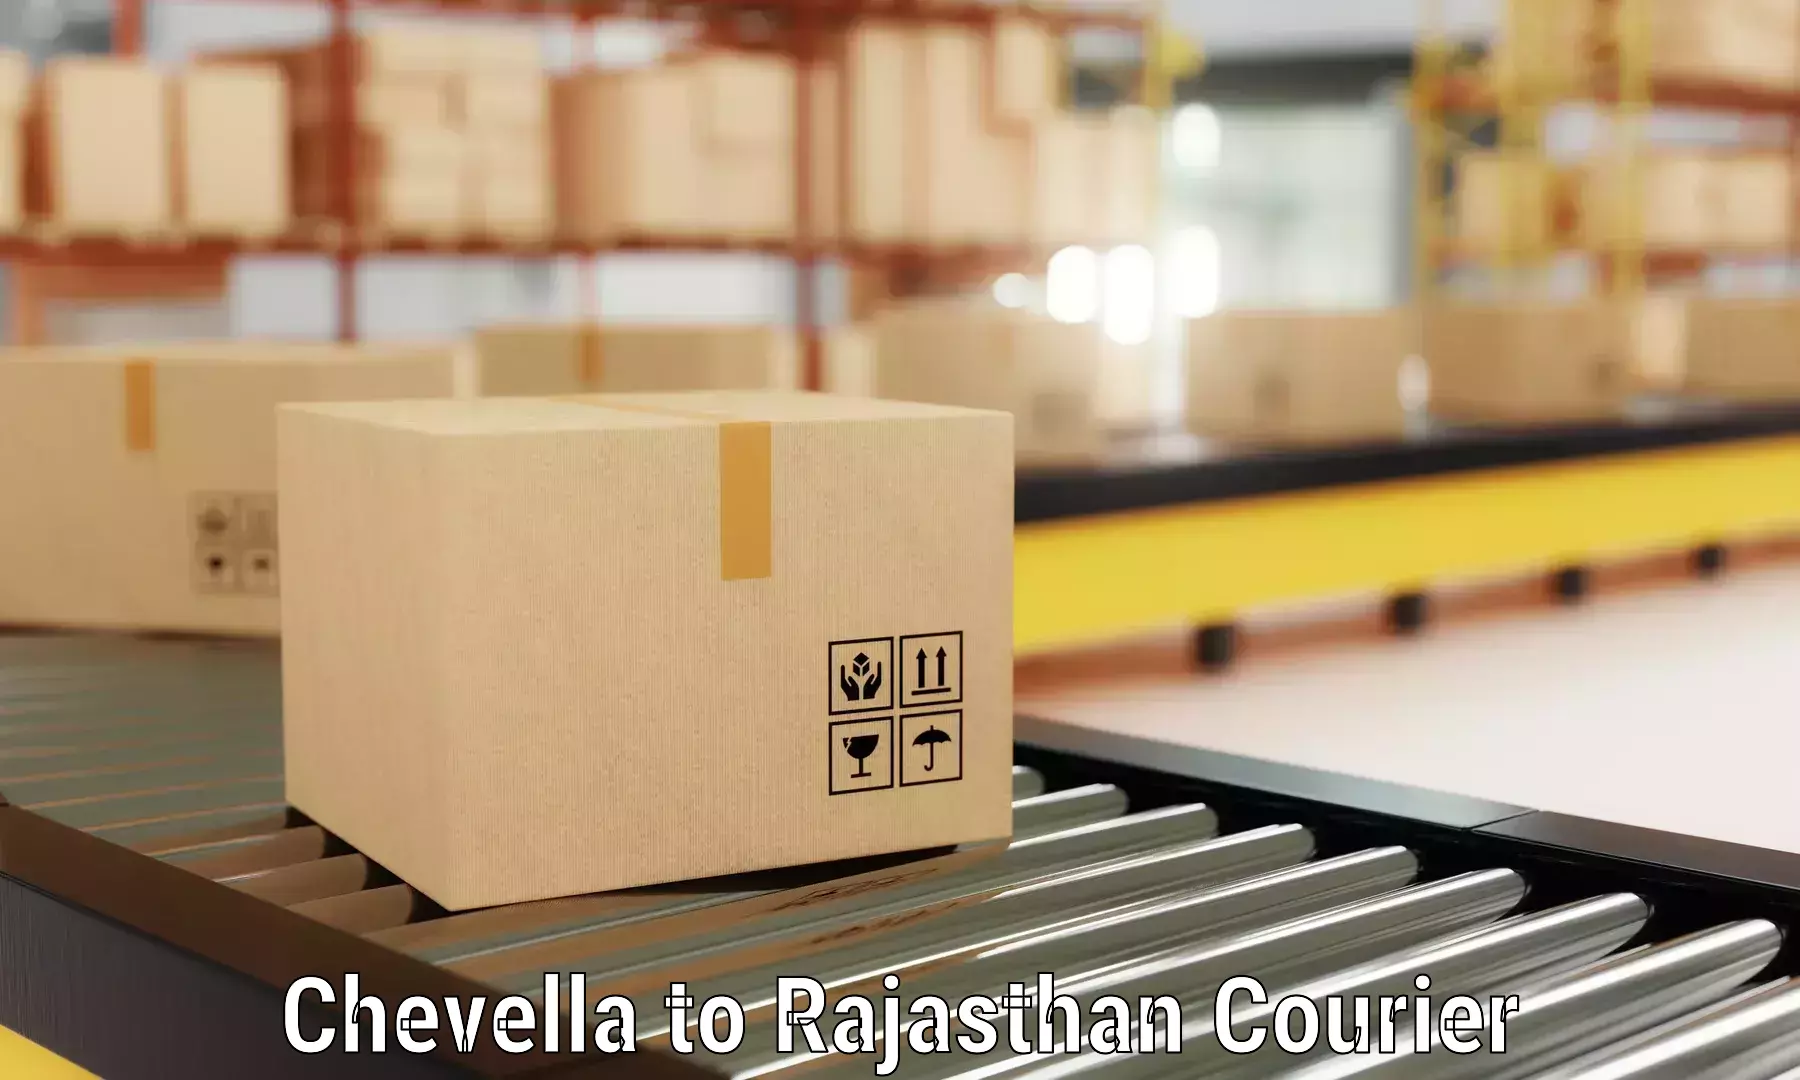 Trusted moving company Chevella to Jaipur